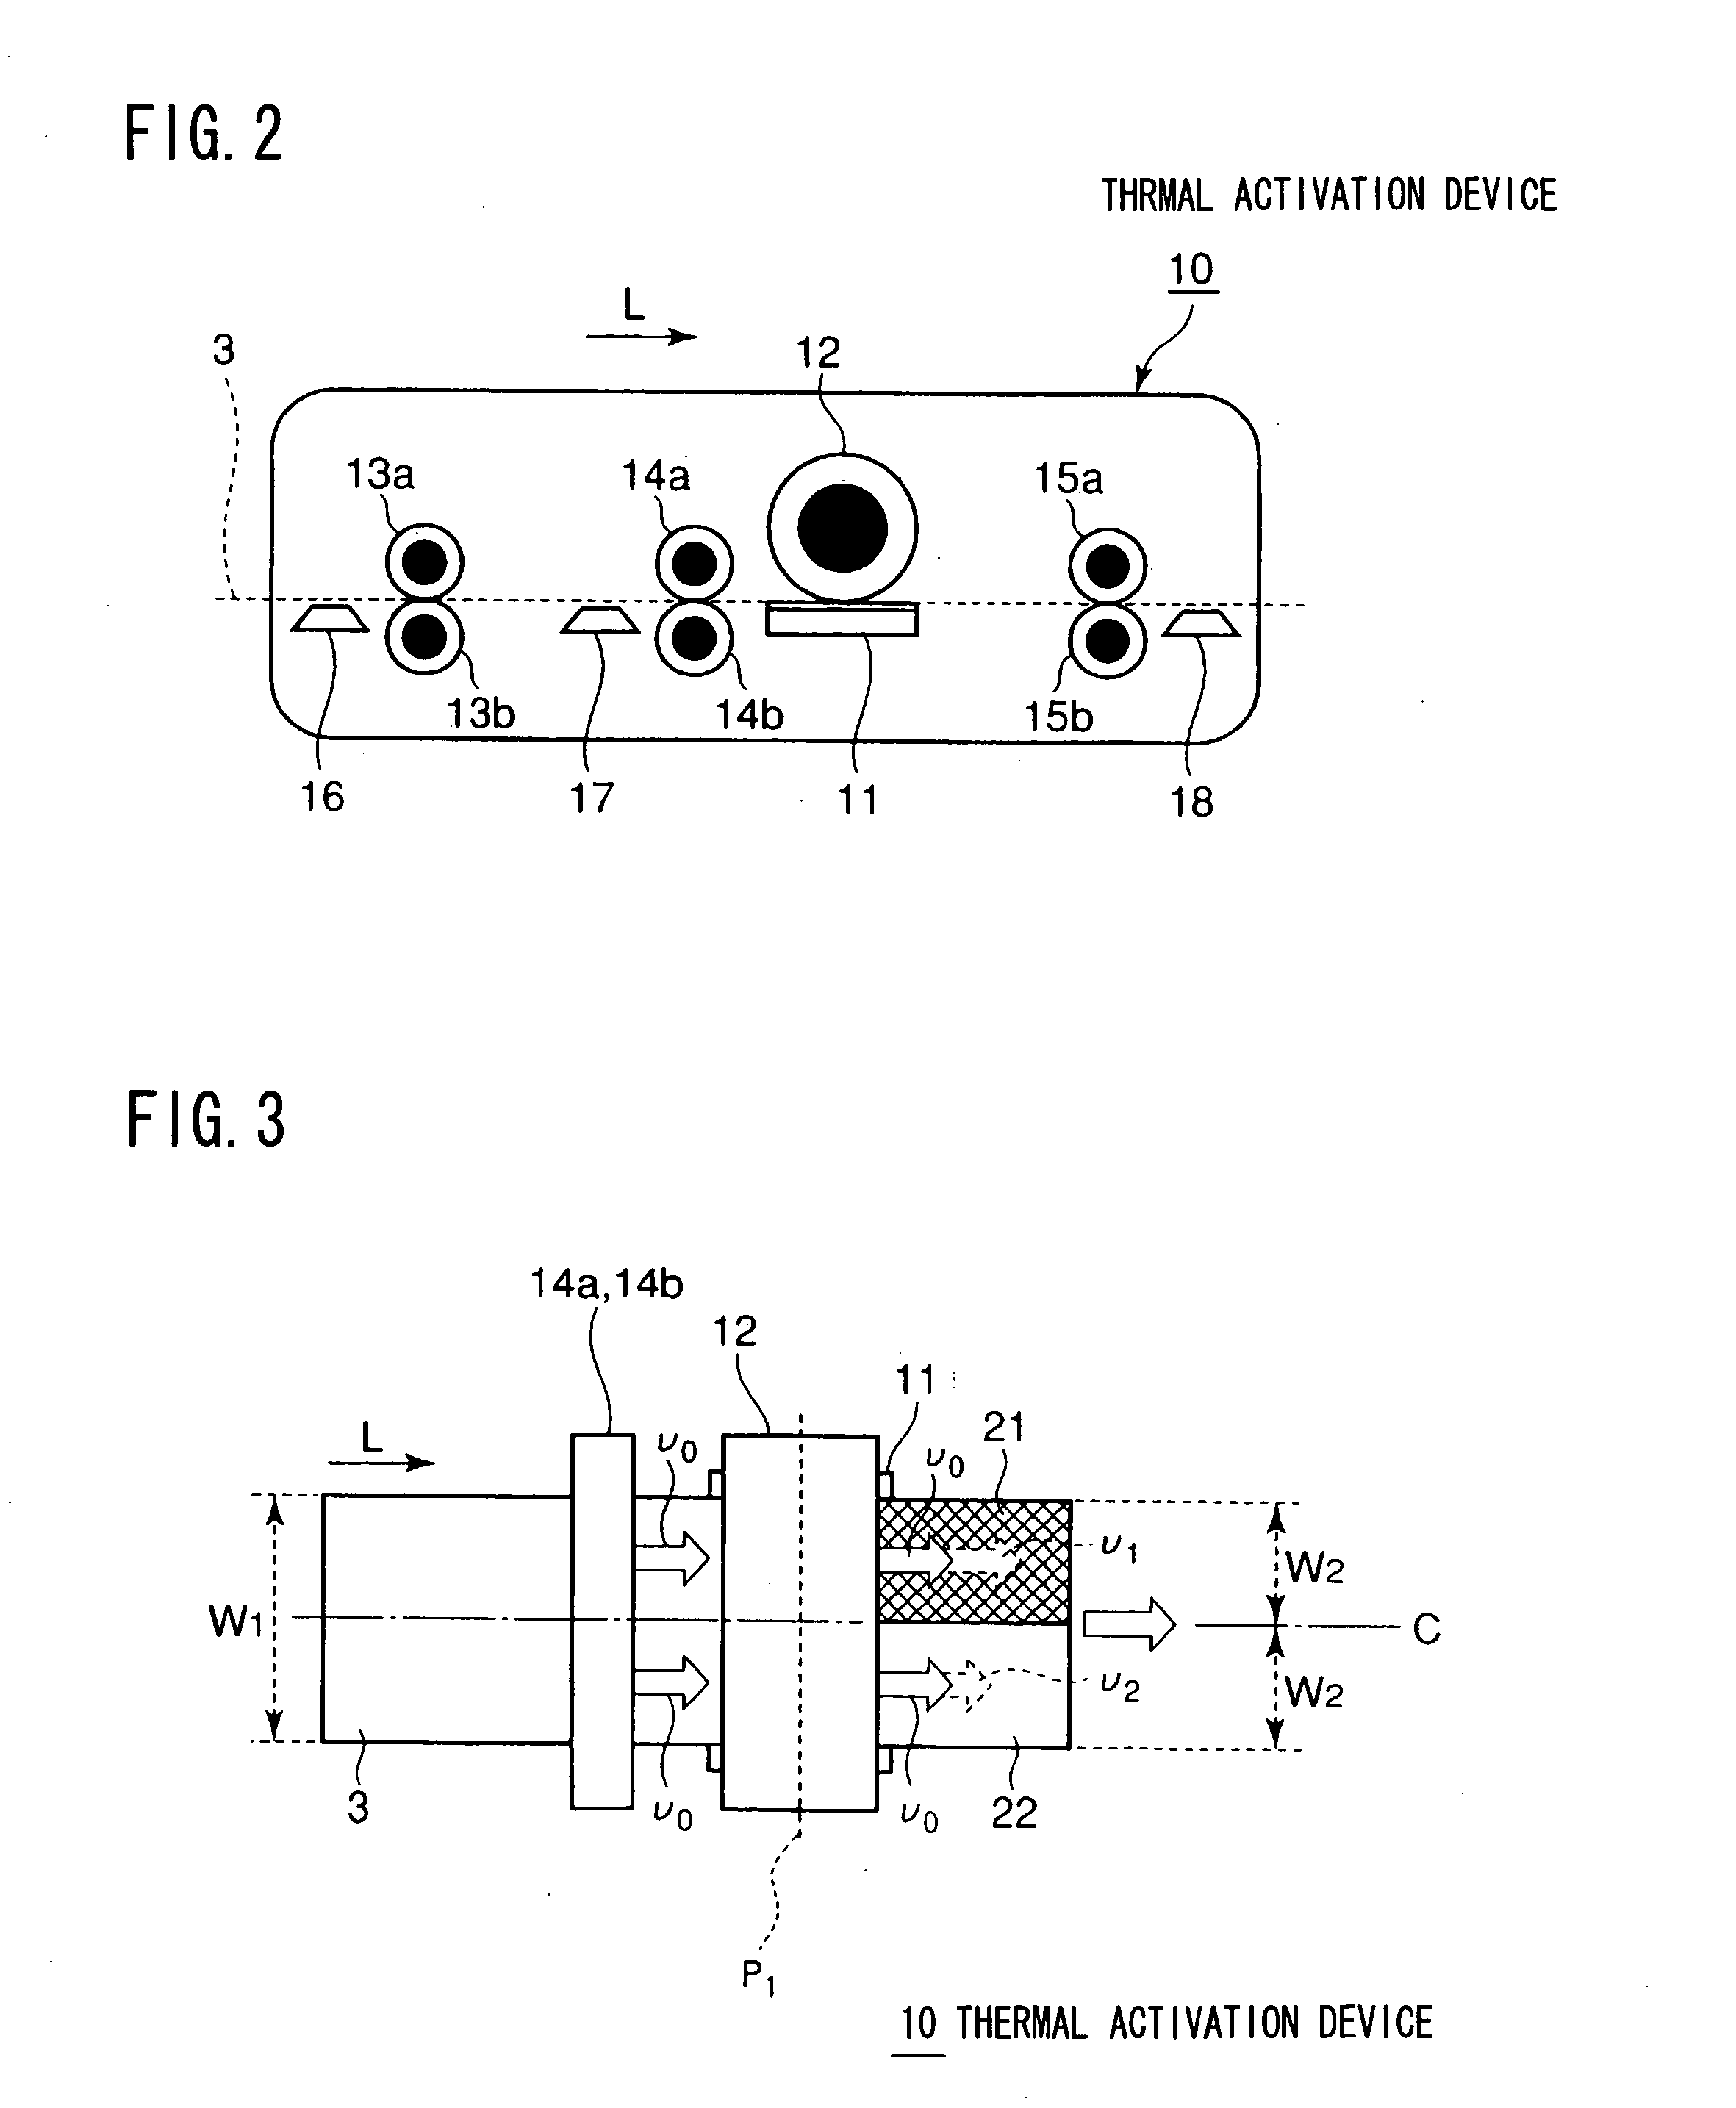 Thermal activation device and method of conveying sheet material